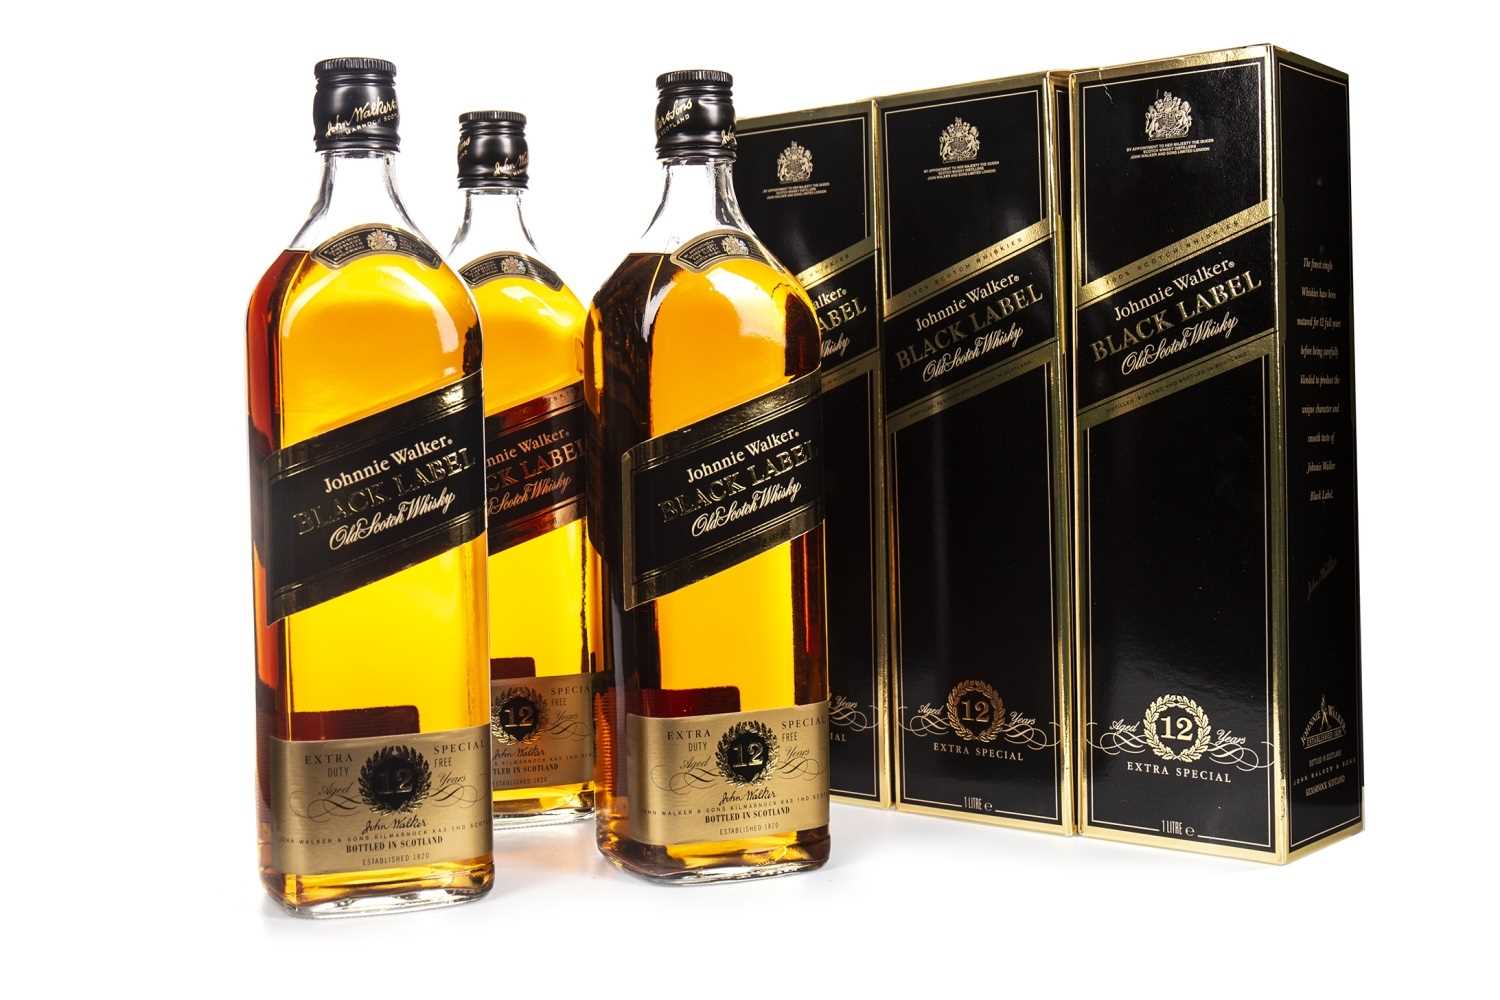 Lot 420 - THREE LITRES OF JOHNNIE WALKER BLACK LABEL AGED 12 YEARS